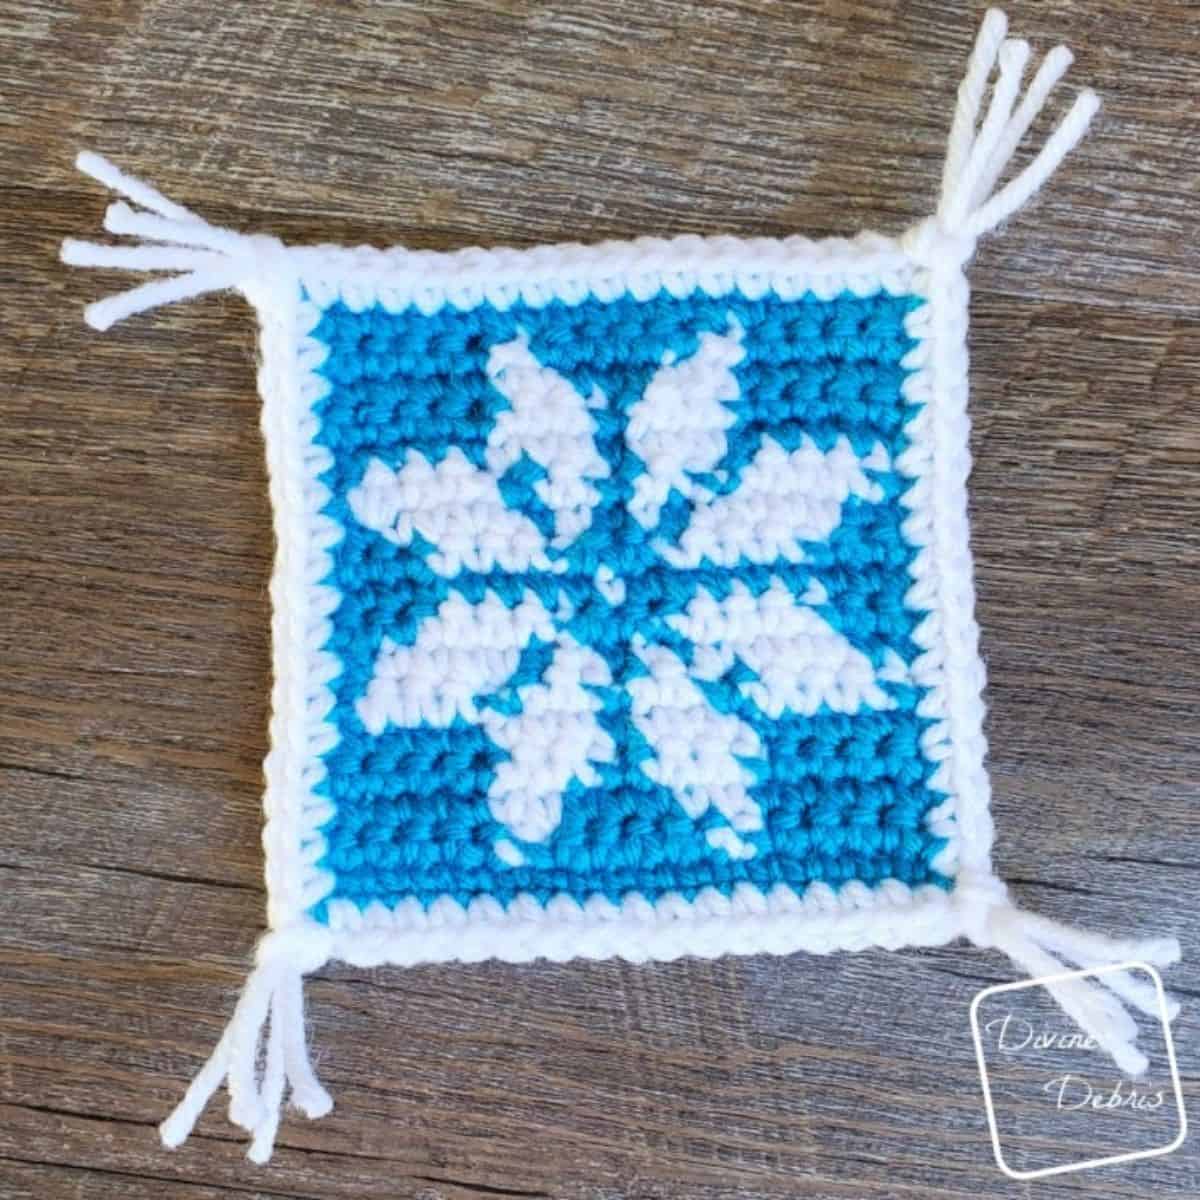 blue and while snowflake crochet coaster with tassels in the corners